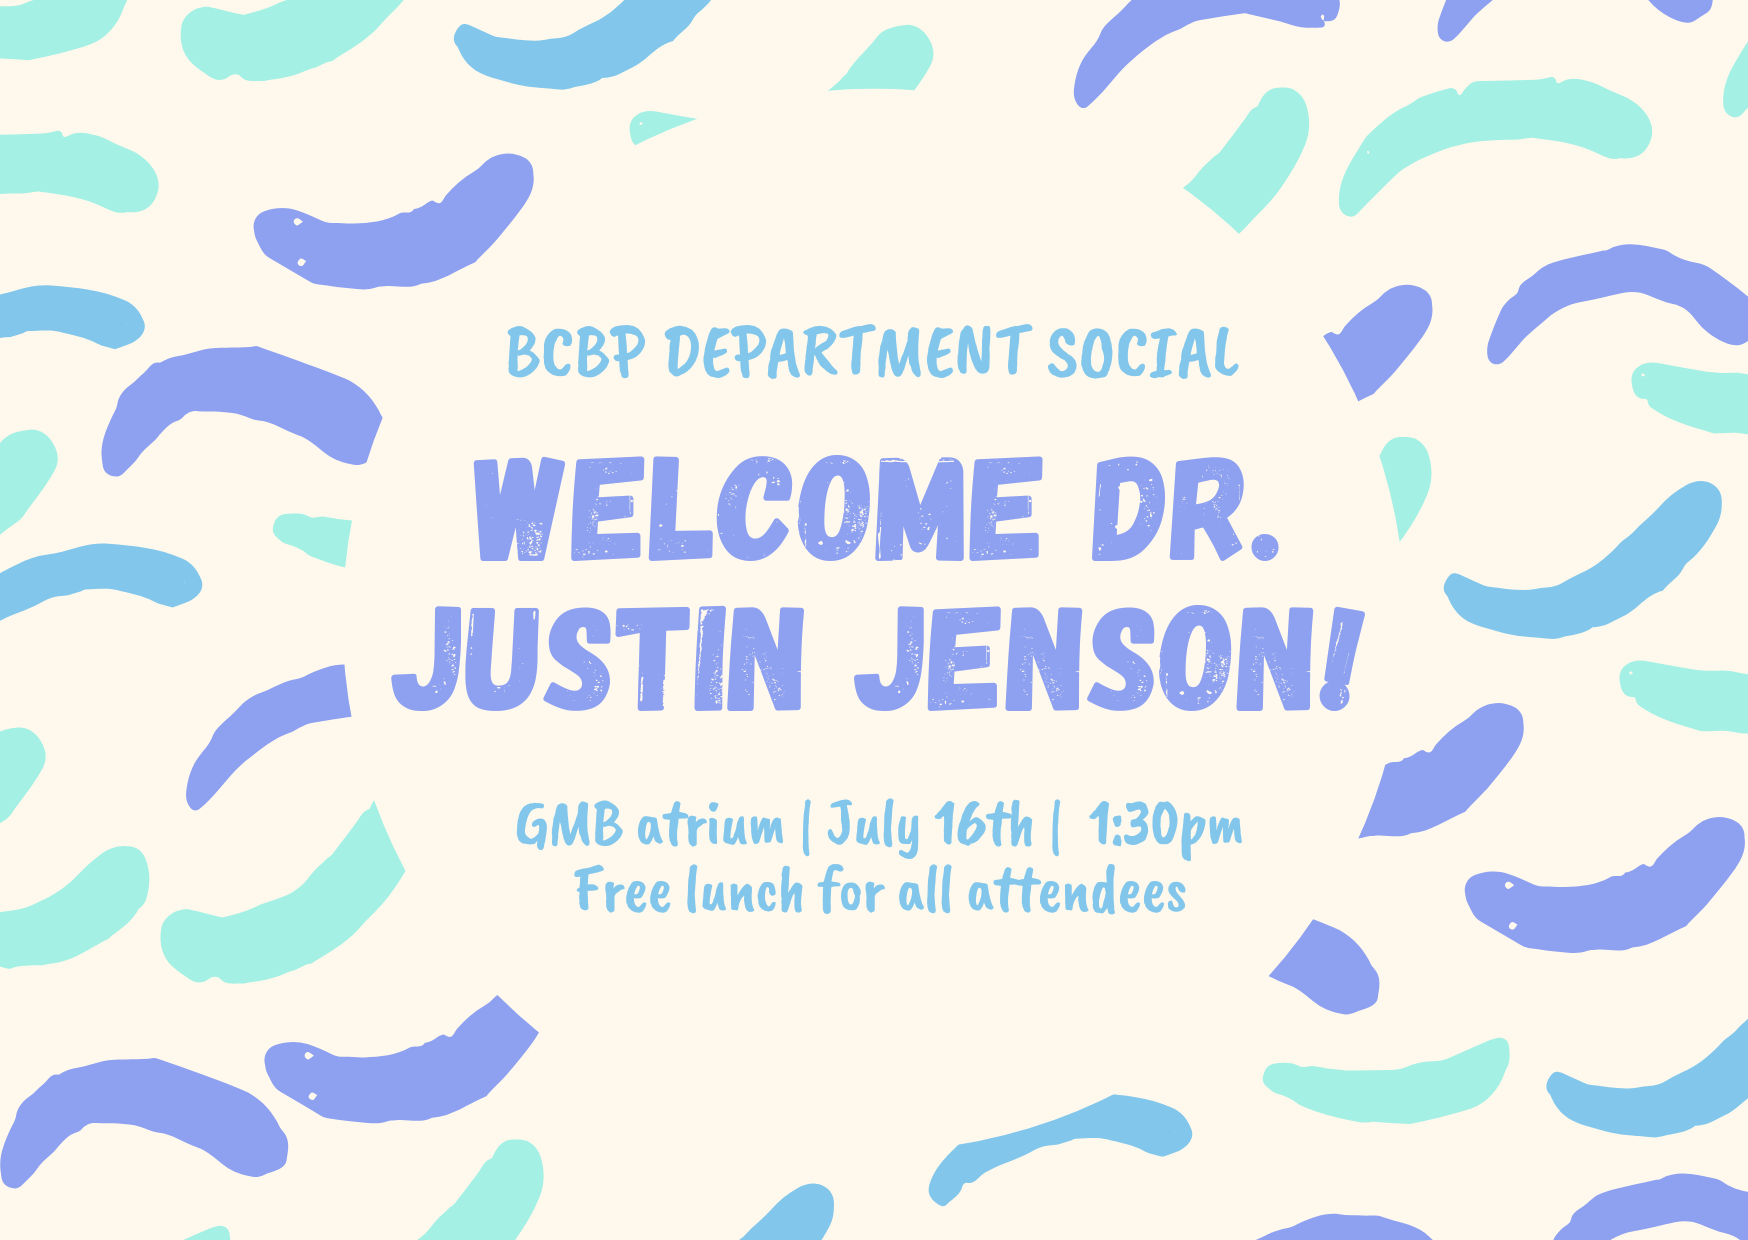 text "social: welcome dr. justin jenson on July 16 at 1:30pm in GMB third floor atrium"